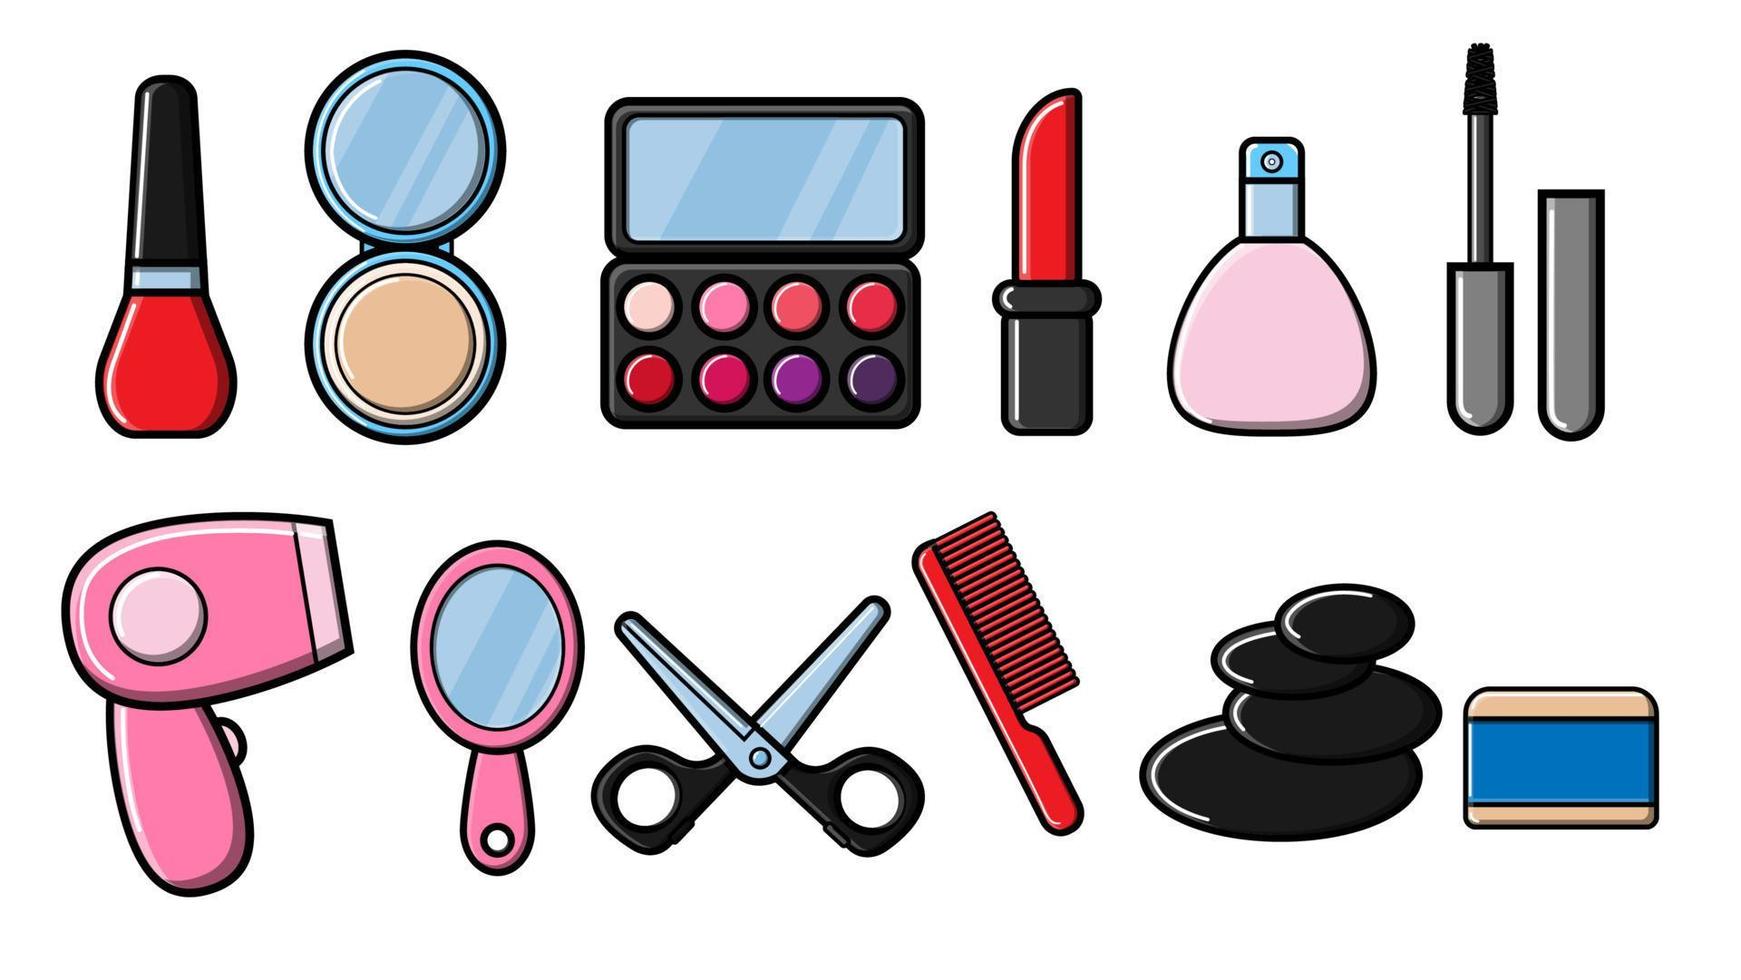 Set of 12 beautiful flat icons of fashionable glamorous beauty items hairdryer, comb, lipstick, powder, mascara, scissors, mirror, perfume isolated on a white background. Vector illustration